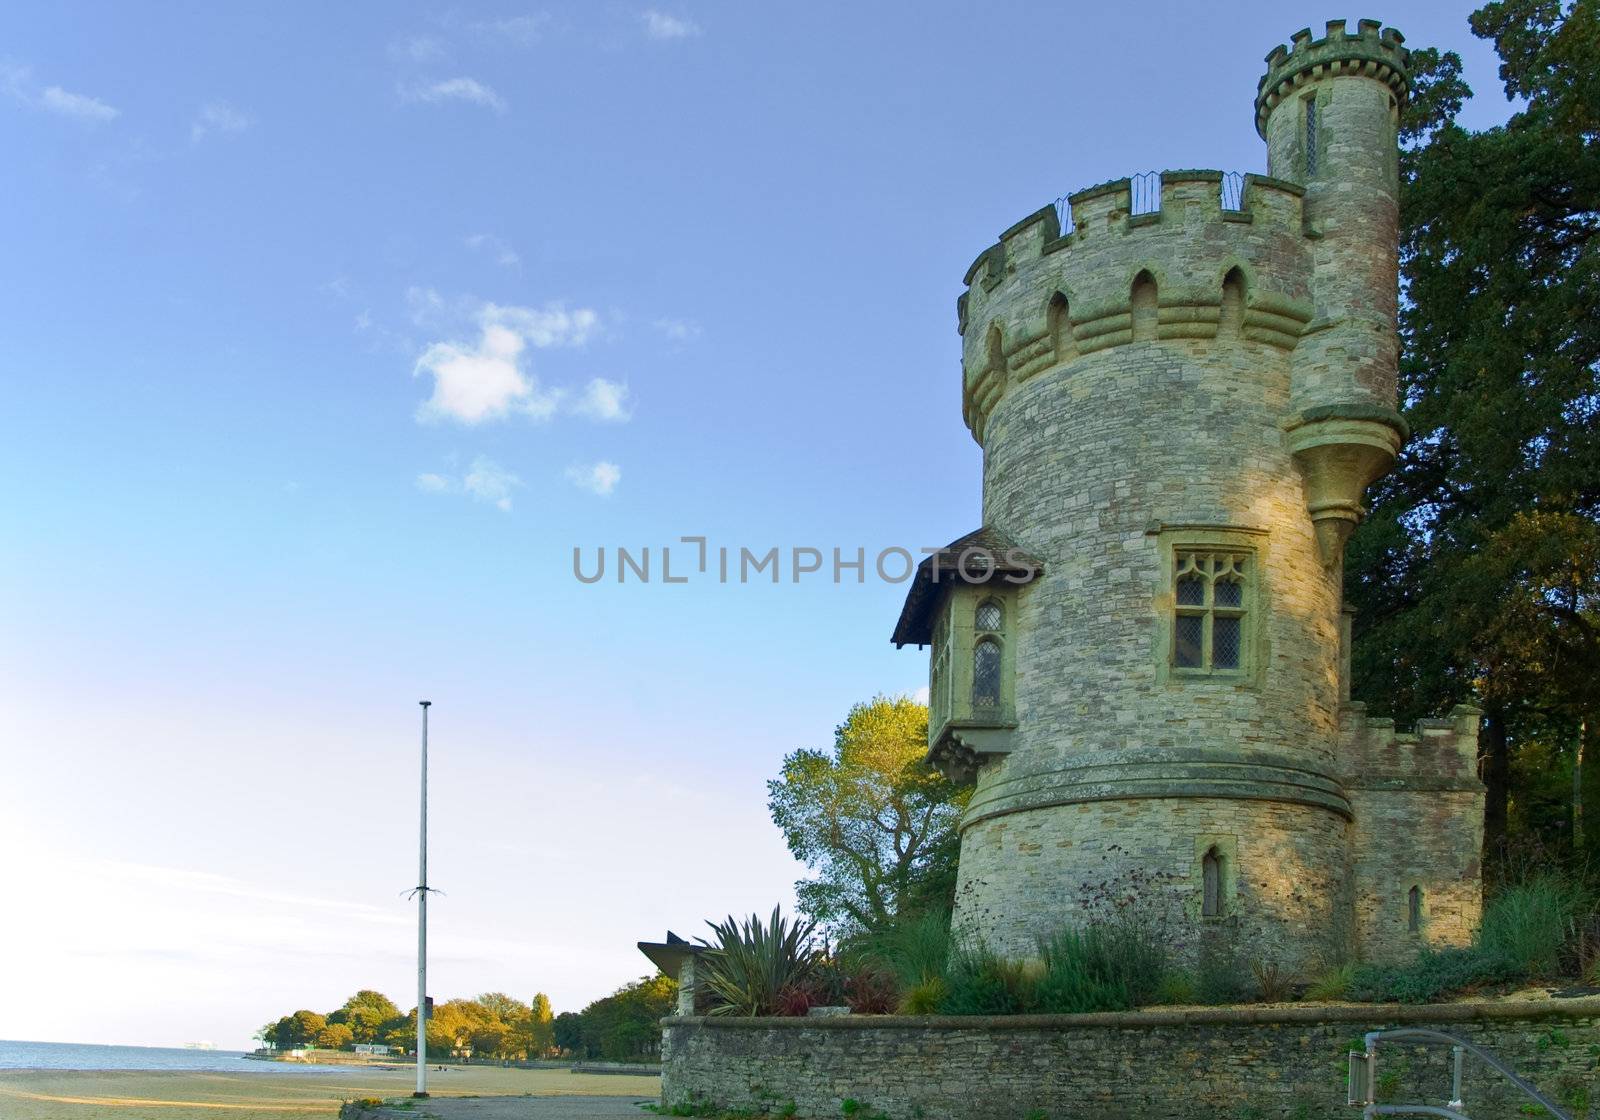 an image of the famous Victorian folly Appley Tower on the beach at Ryde in the Isle of Wight UK